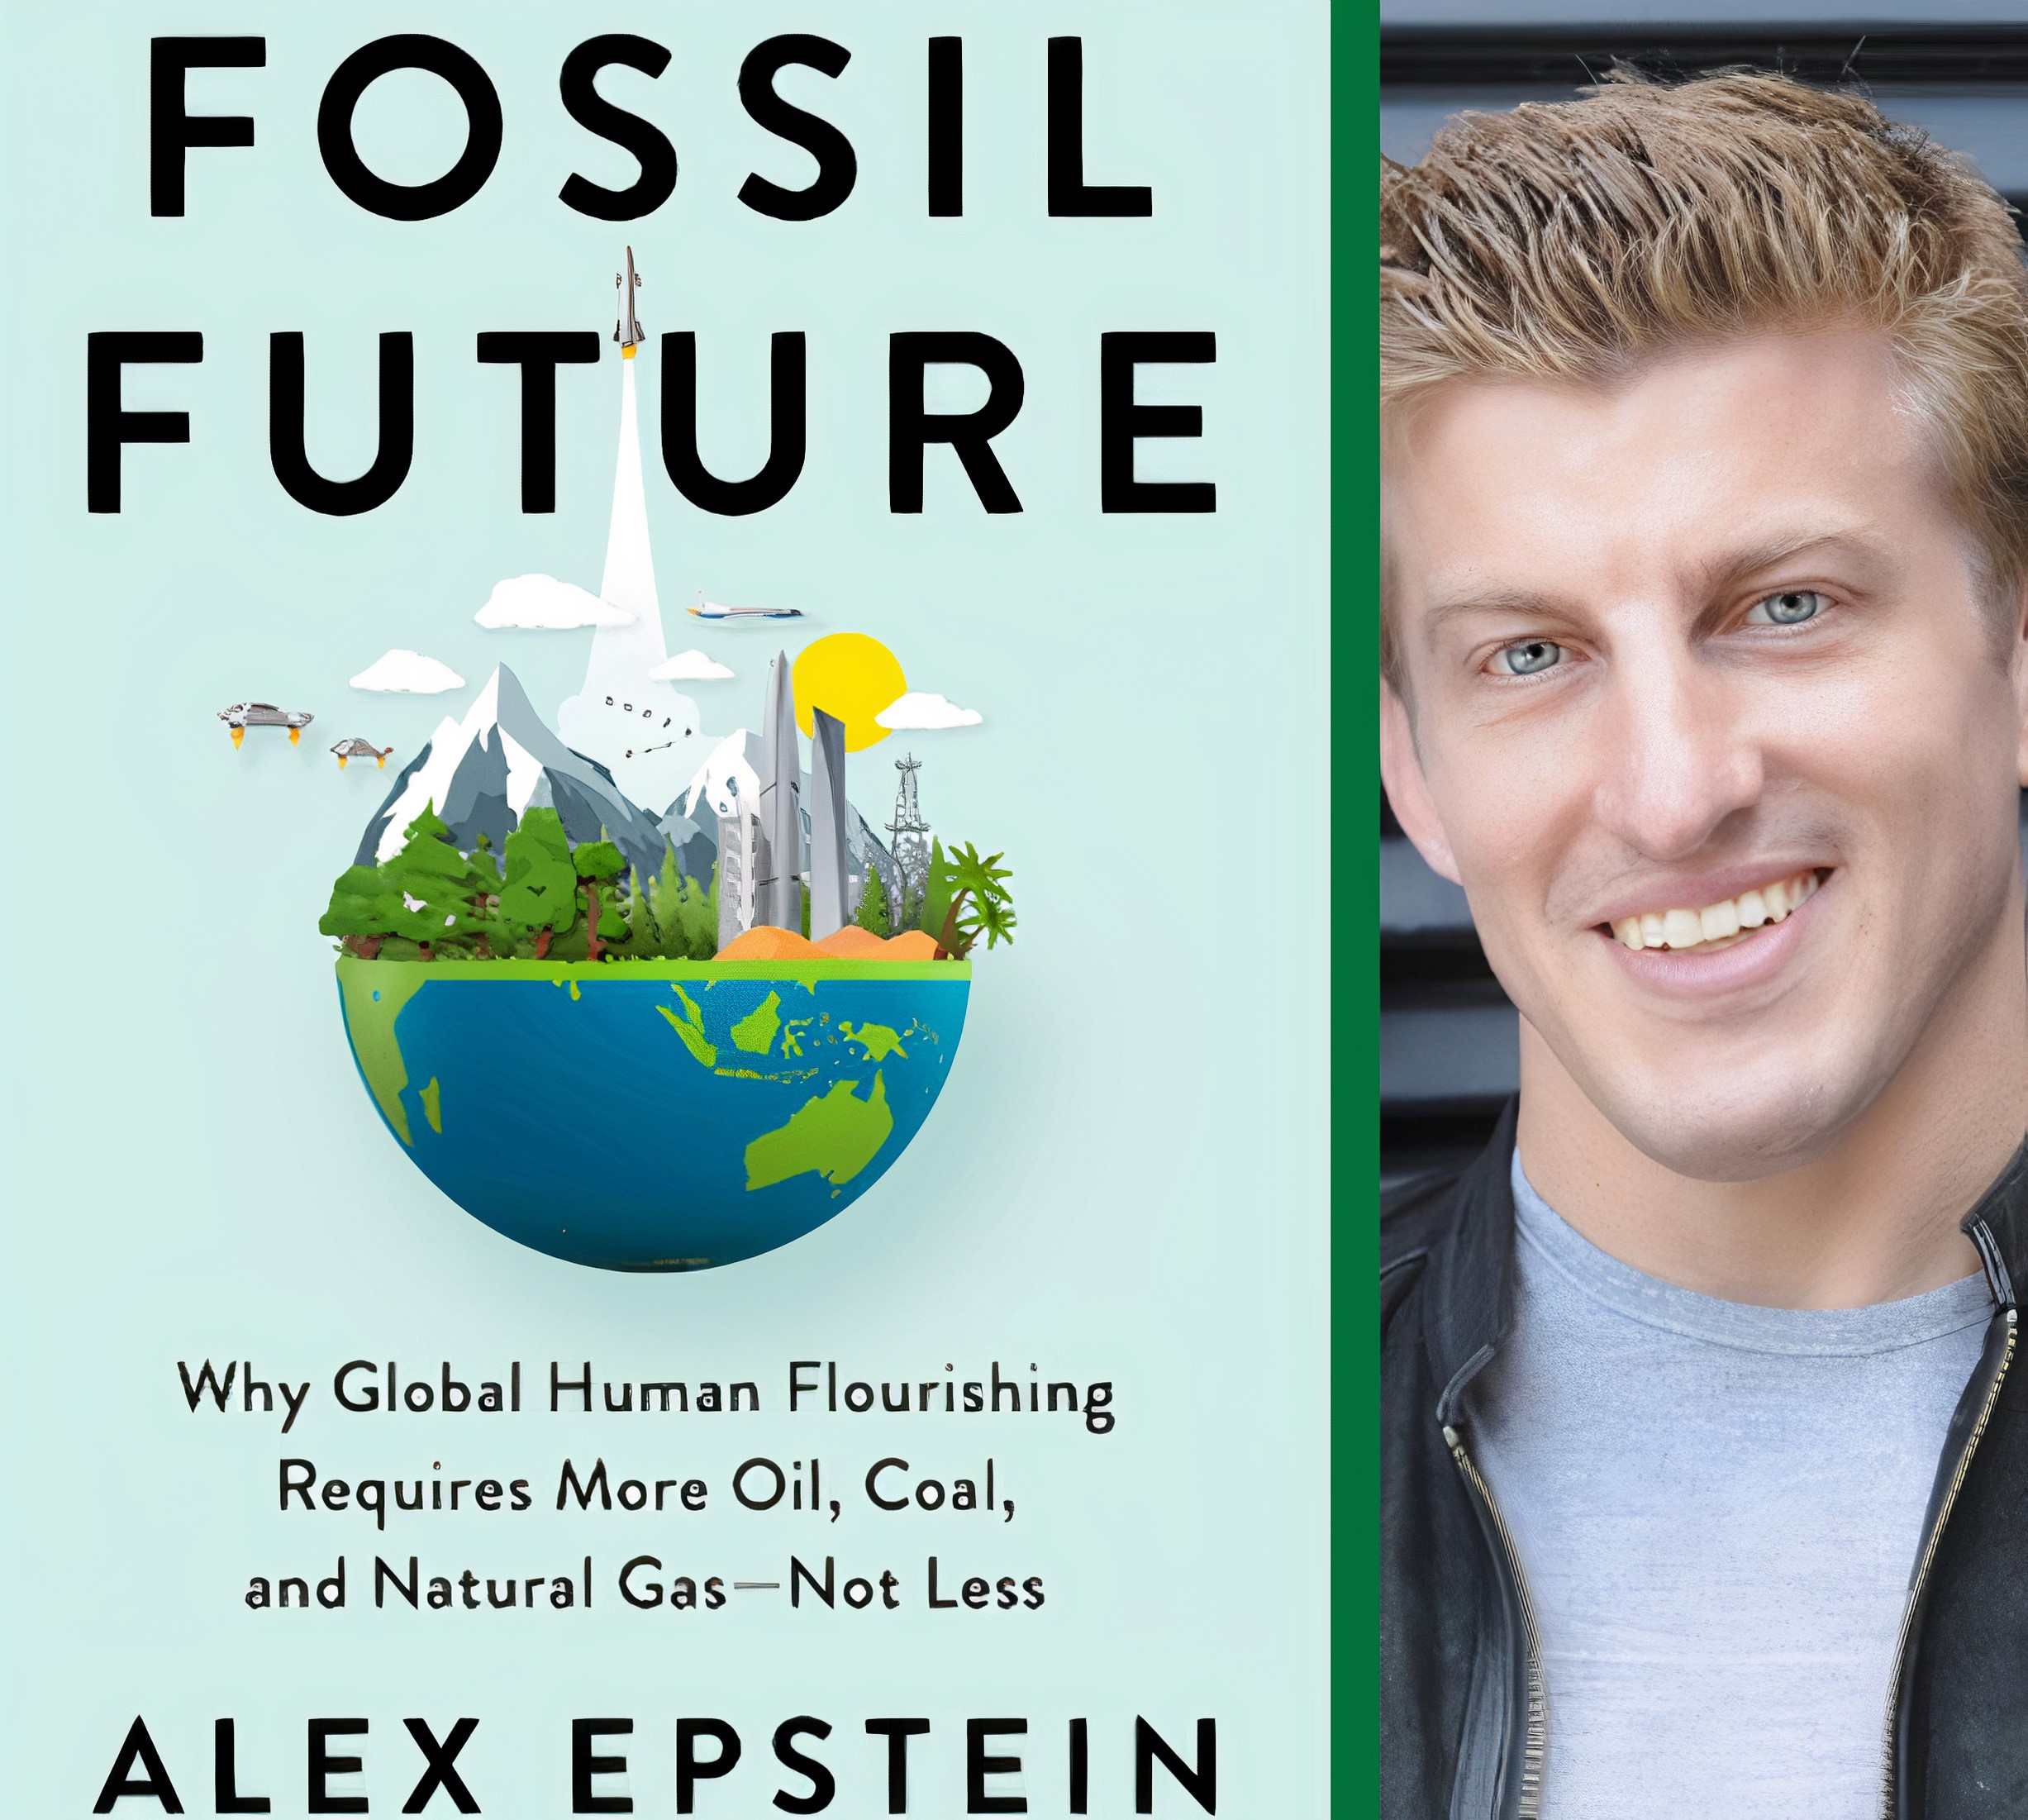 Fossil Future' Author Alex Epstein Makes Strong, Fact-Based Case for Fossil  Fuels' Ongoing Importance - PAN AFRICAN VISIONS